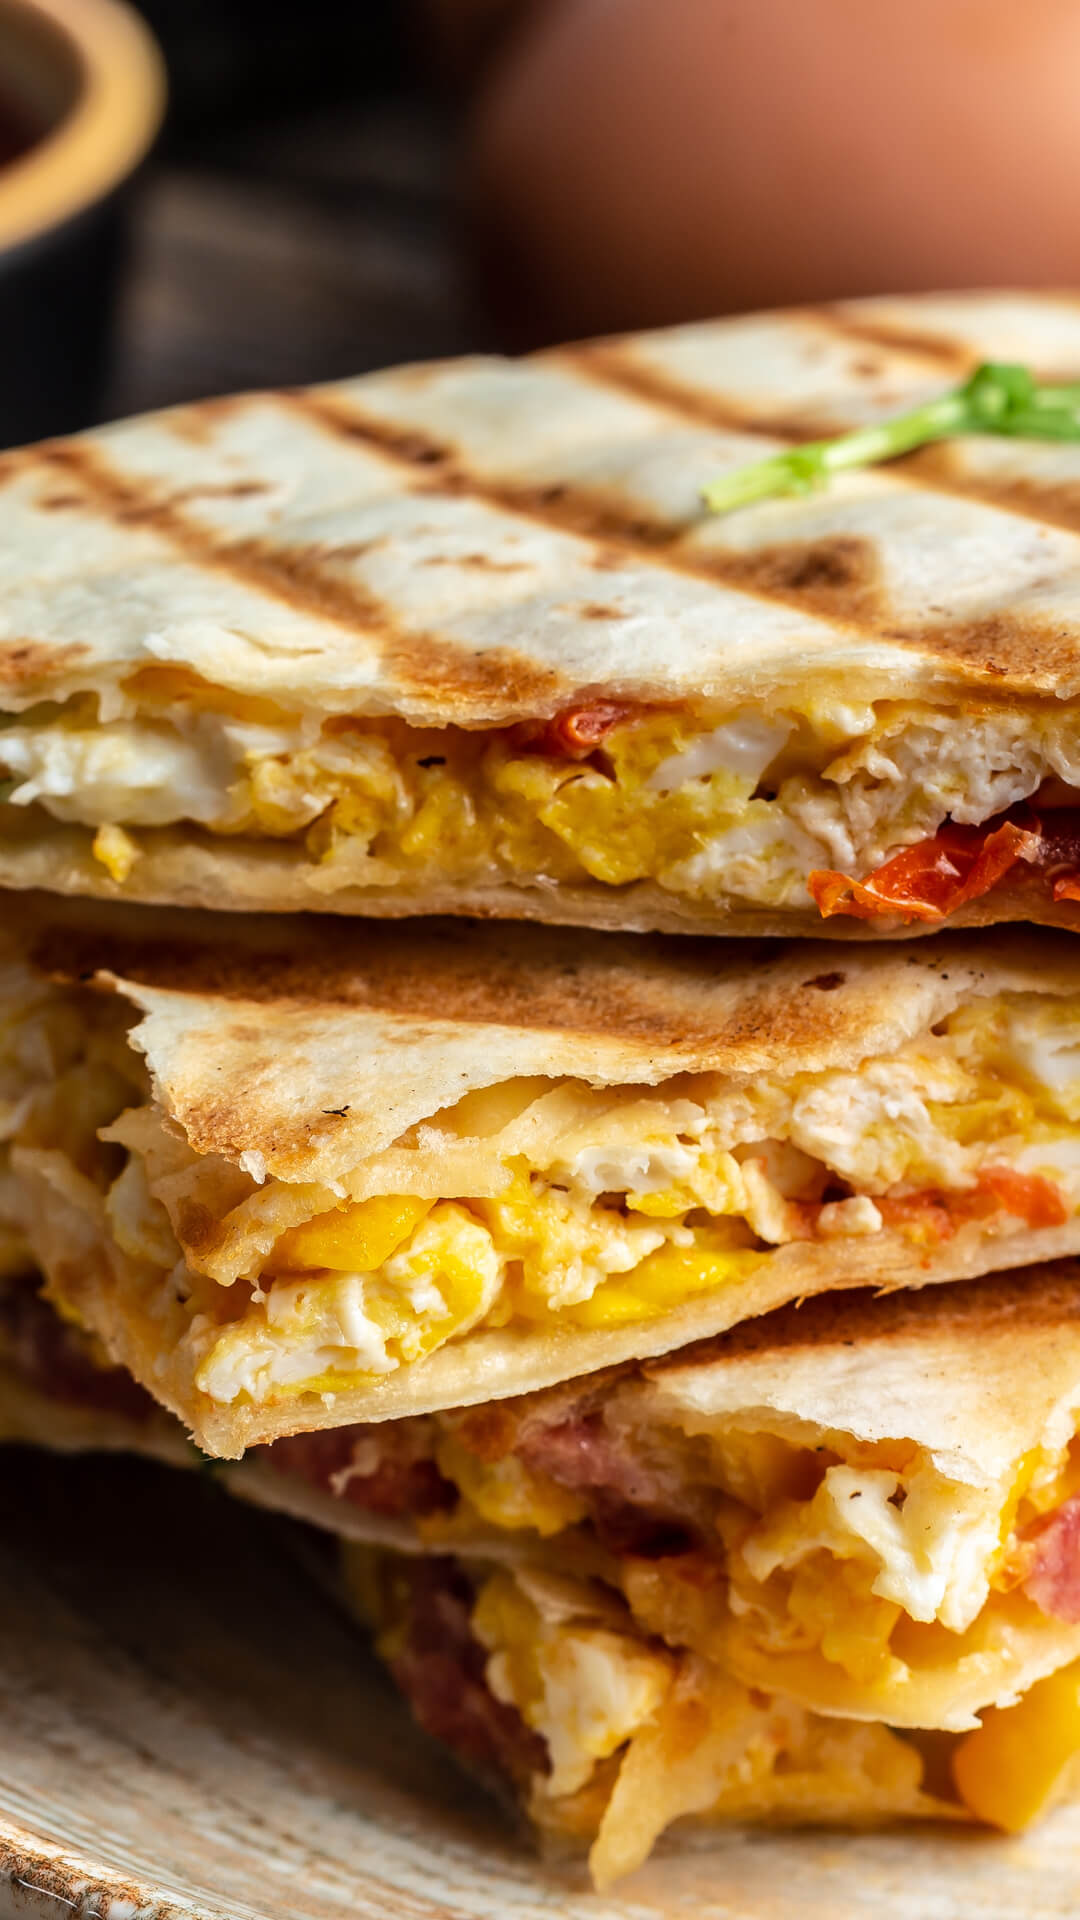 Quesadilla with scrambled eggs and cream cheese